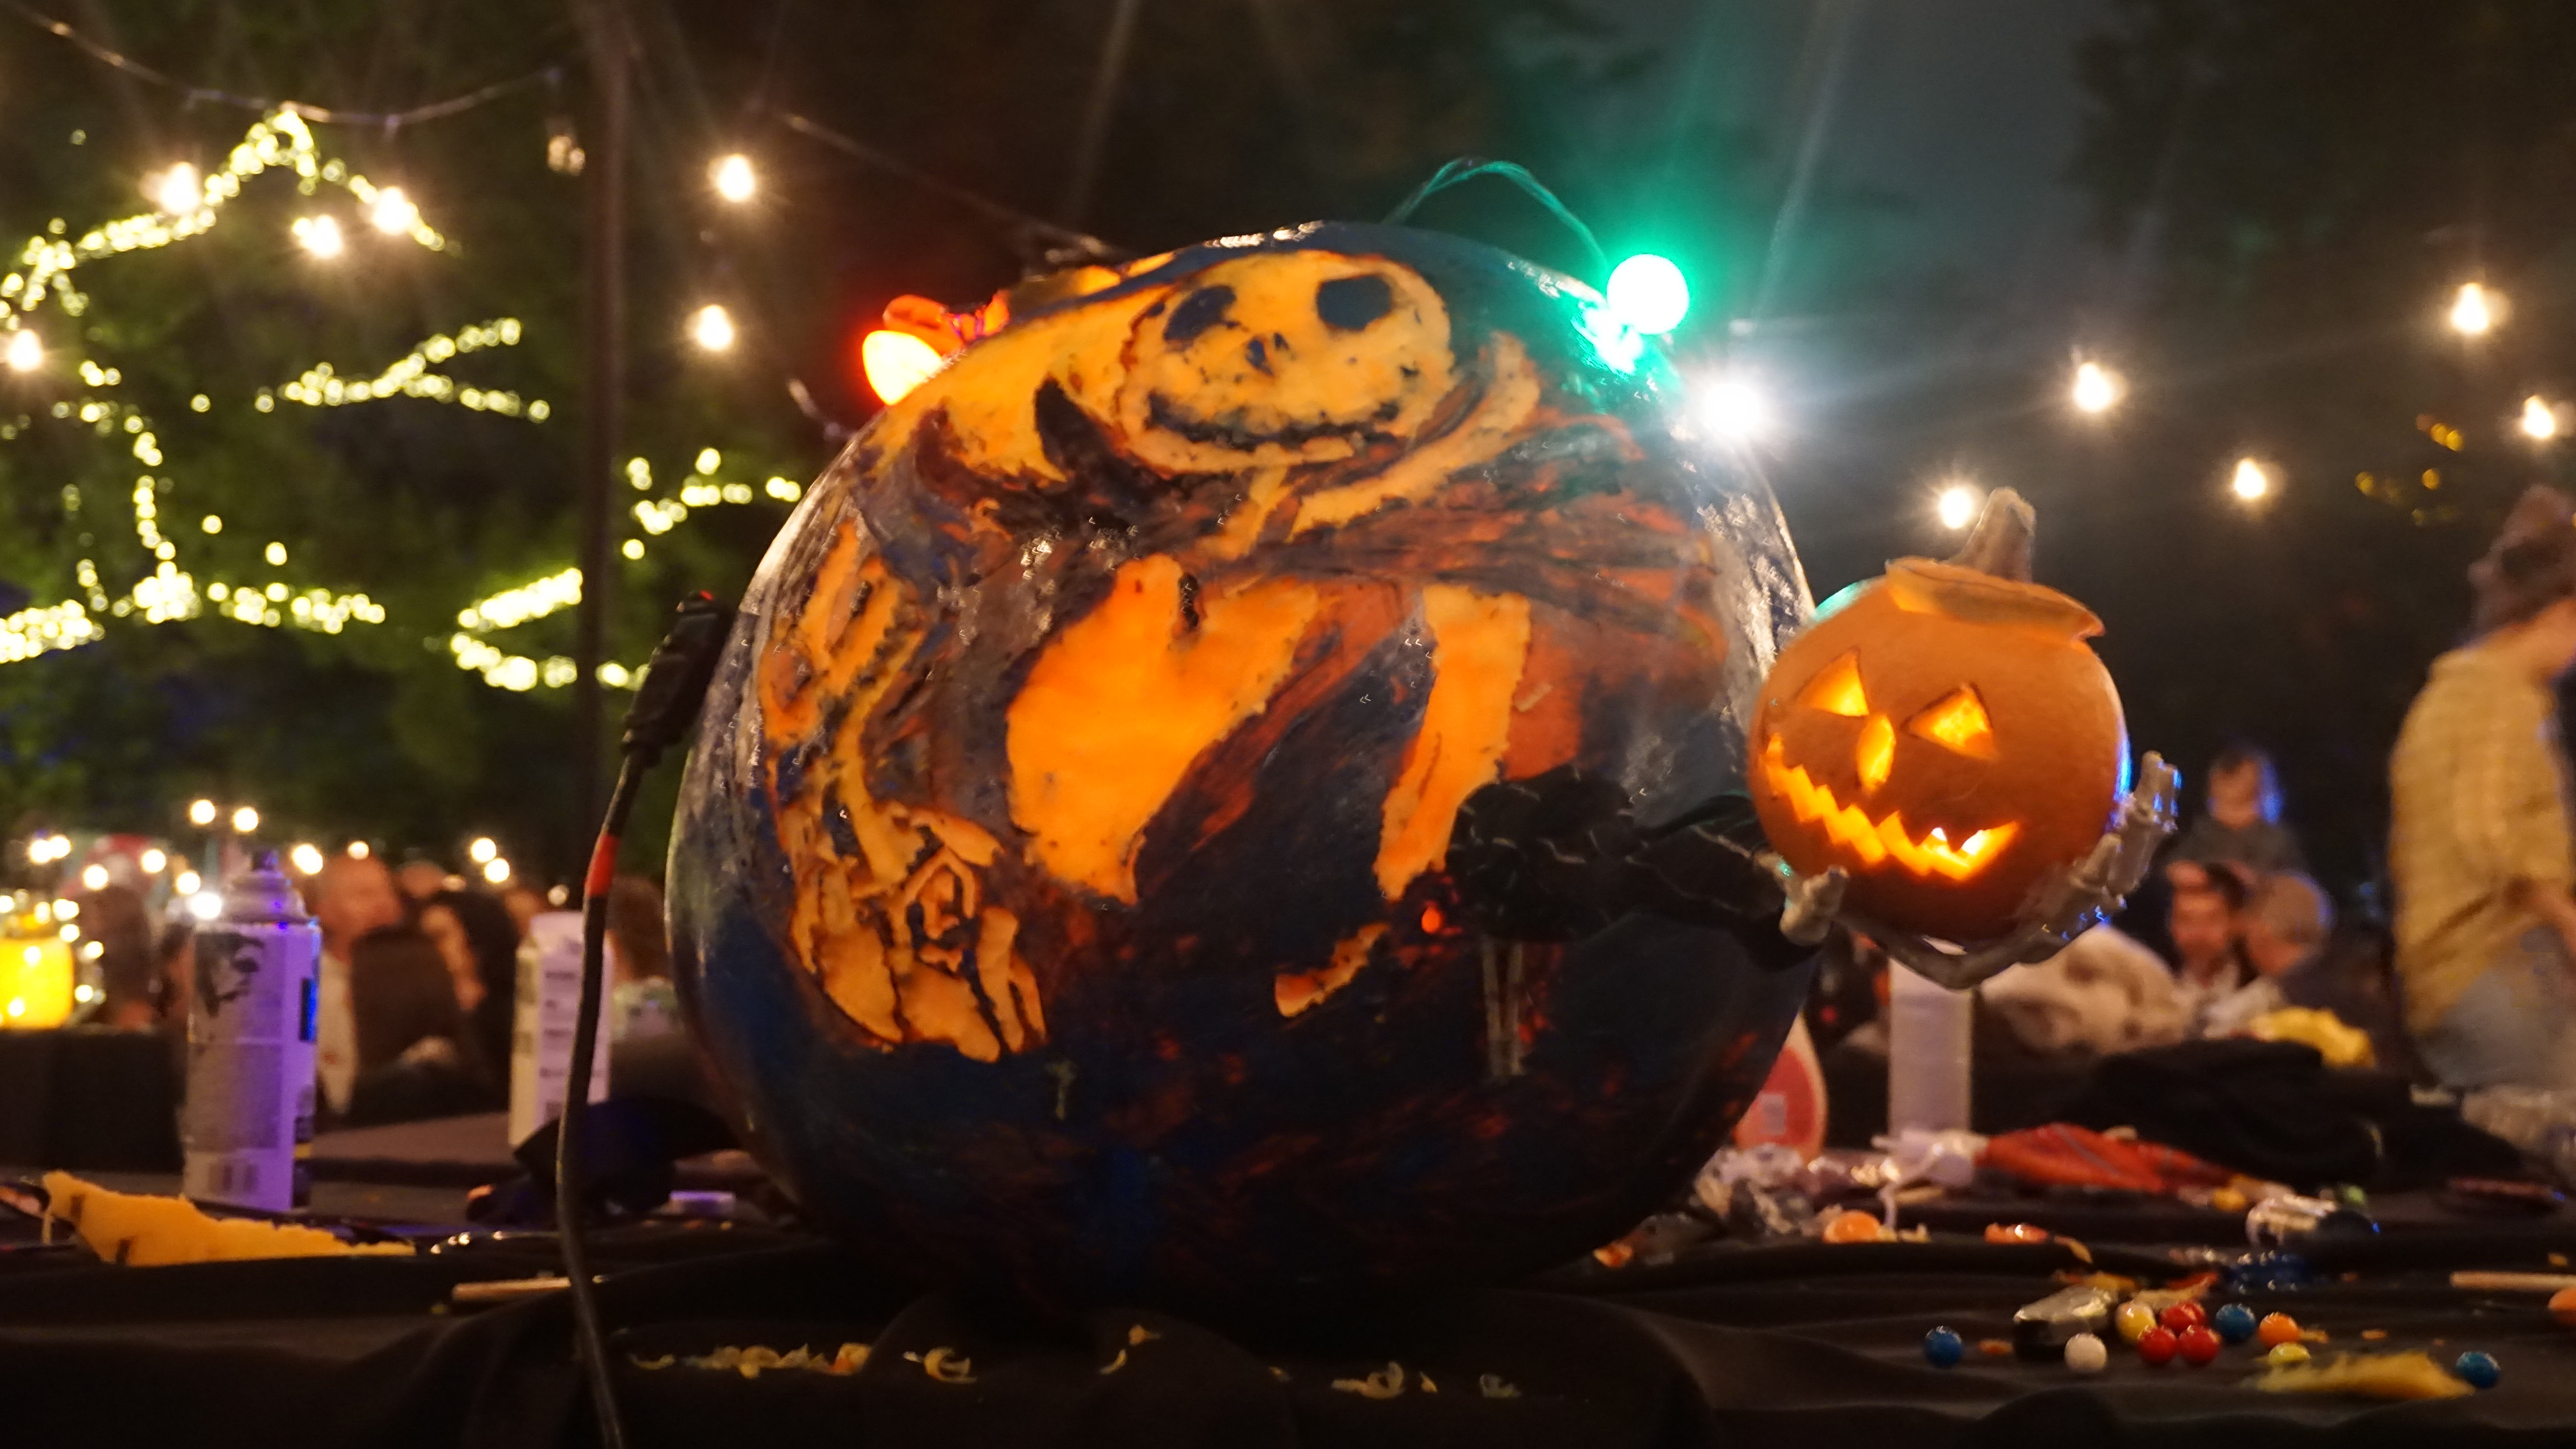 "The Nightmare Before Christmas" inspired this pumpkin carving created by Longleaf during the contest. 